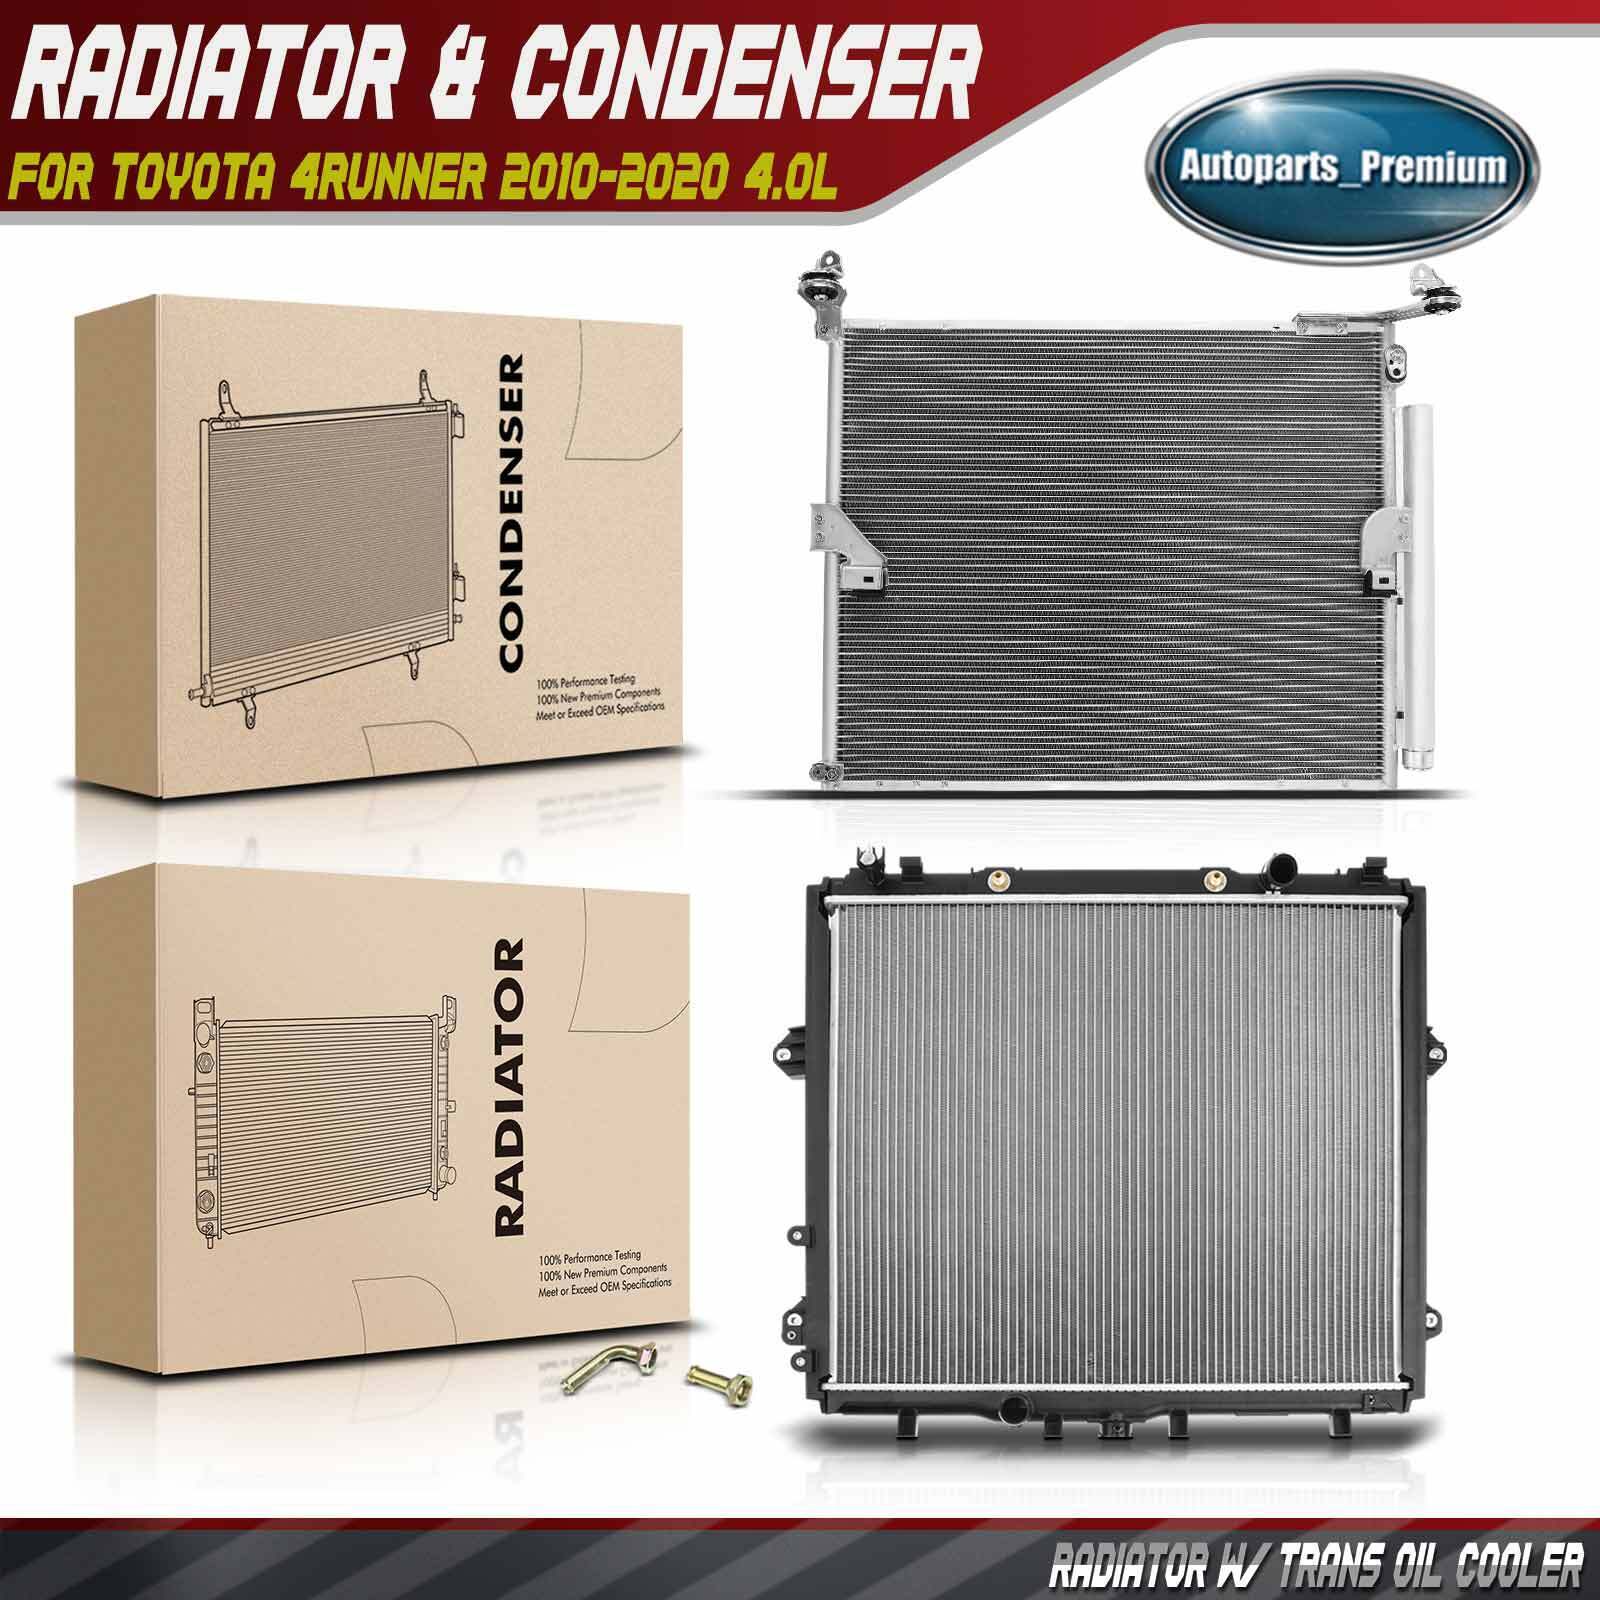 Radiator & AC Condenser Cooling Kit for Toyota 4Runner 2010-2020 4.0L Auto Trans